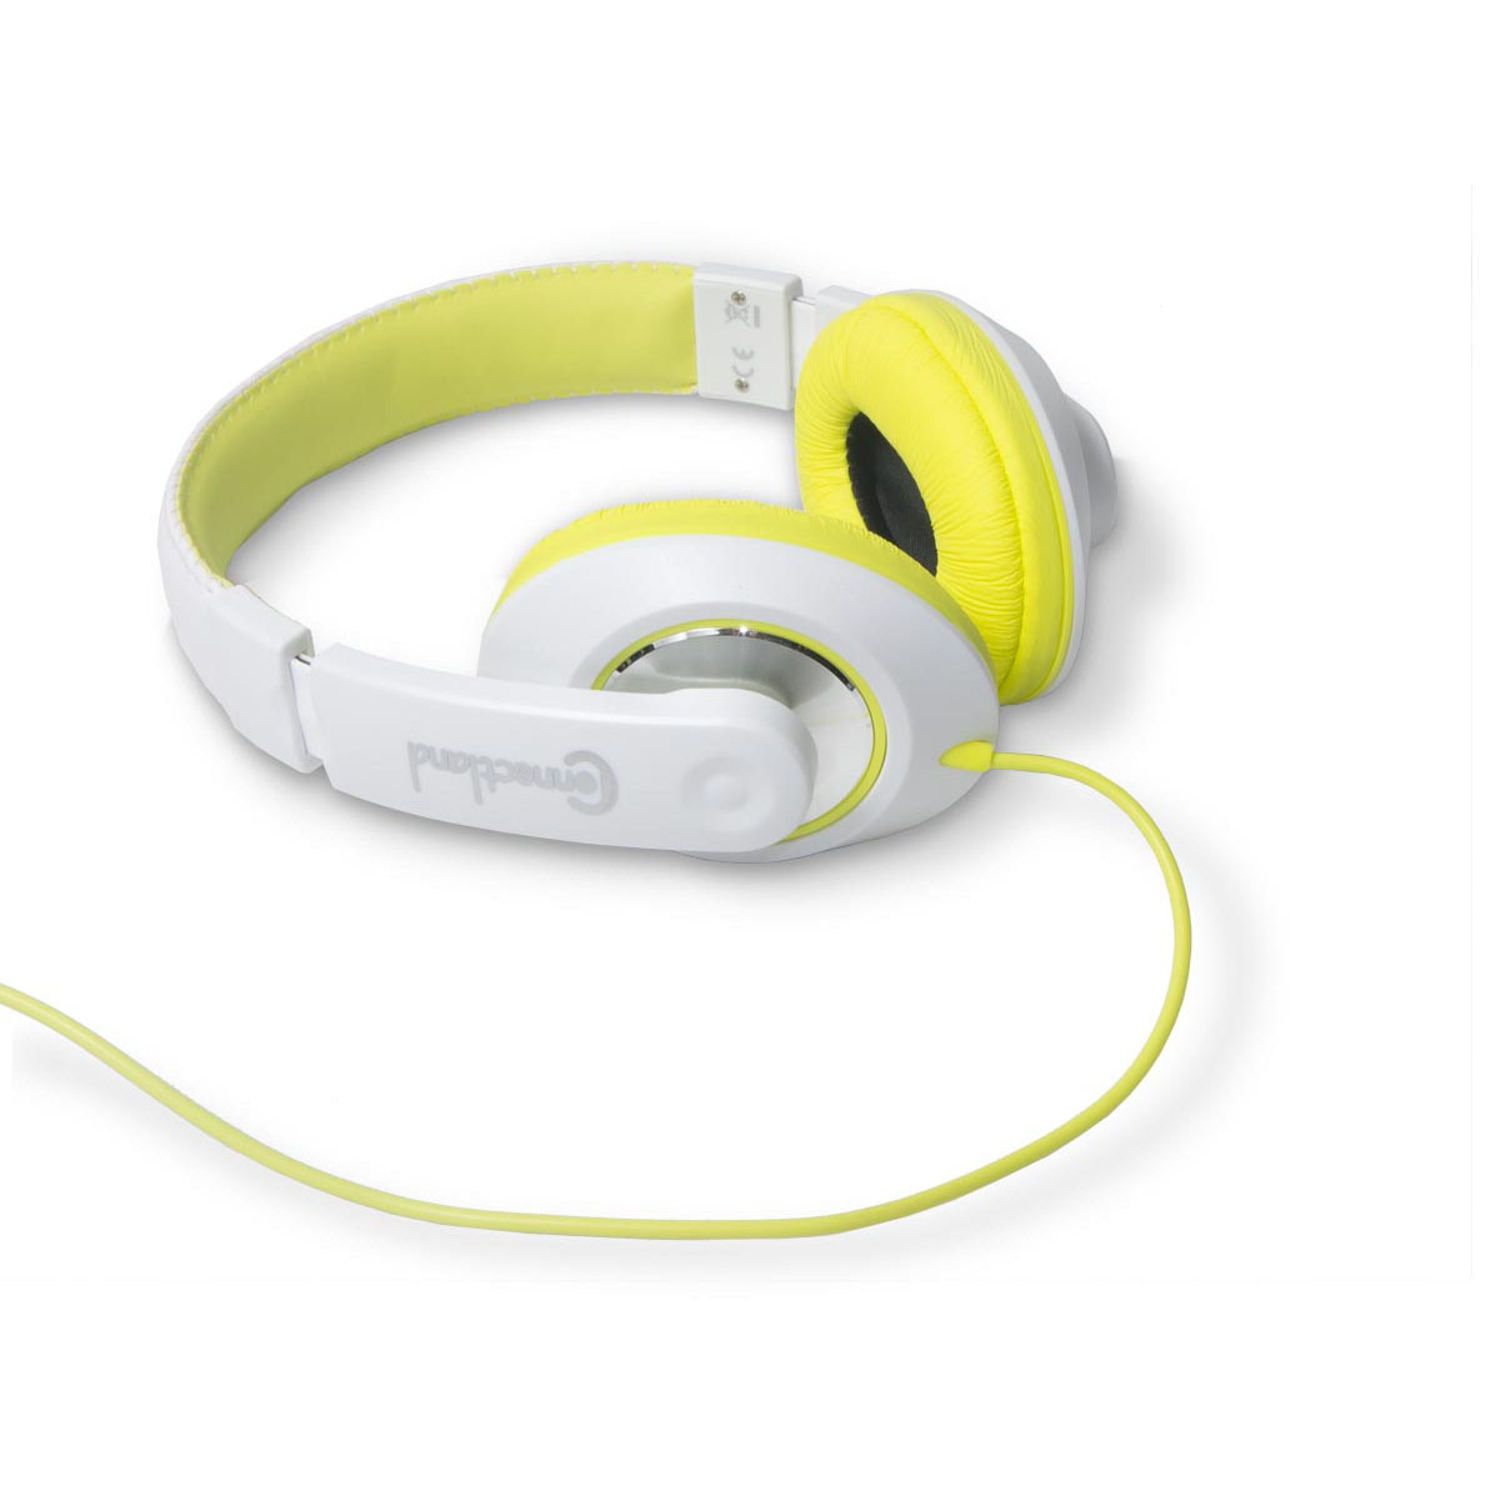 Syba CL-AUD63033 Over The Ear Stereo Headphone for Mobile Devices and Smartphone - image 1 of 2